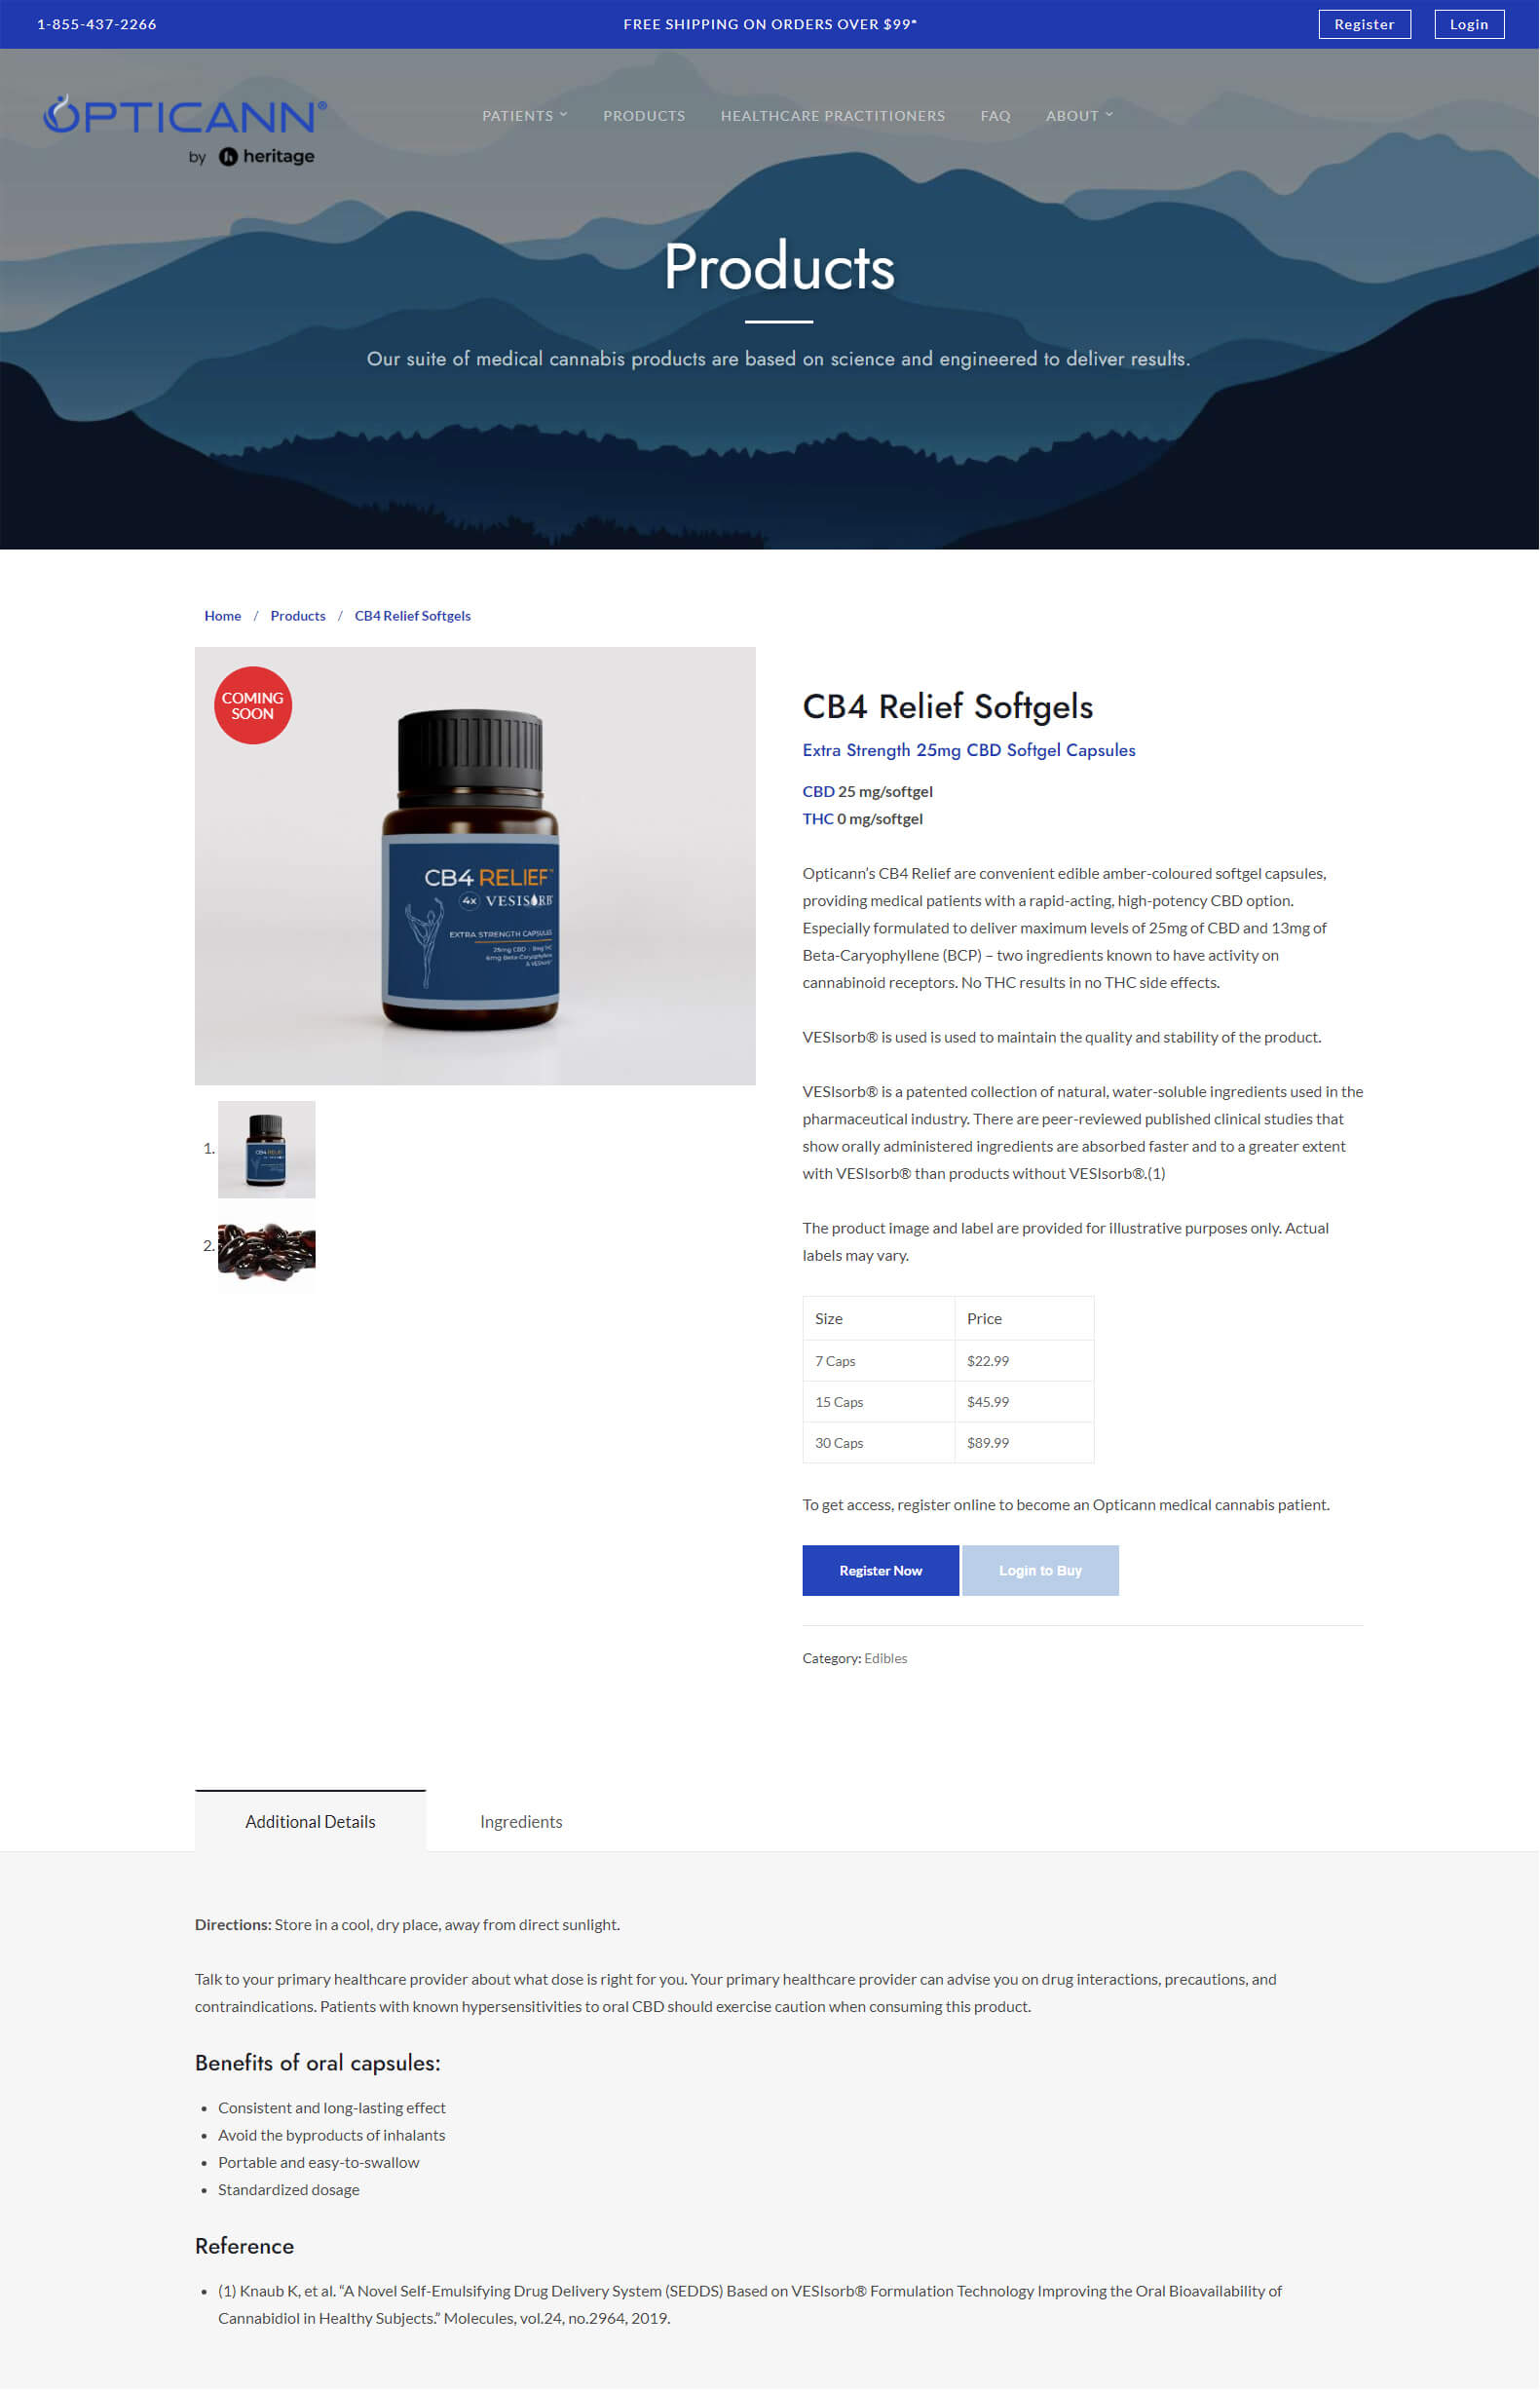 ecommerce cannabis product detail page with options to register/login